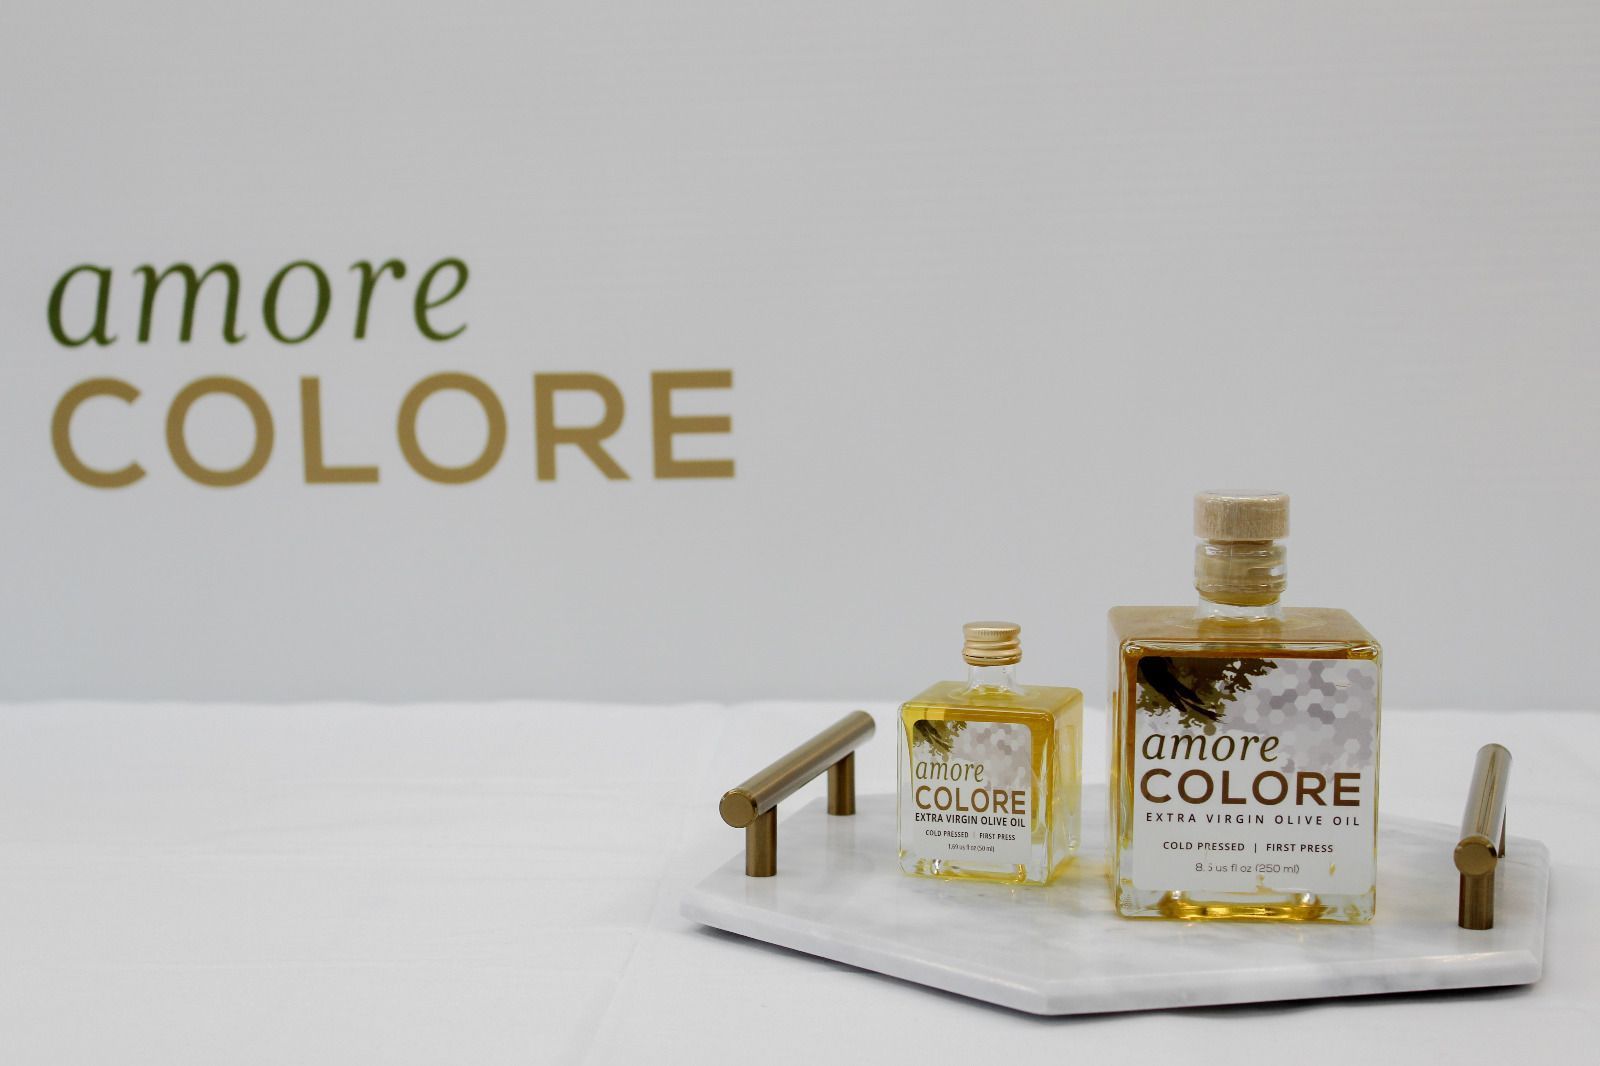 Amore Colore Olive Oil Cold Pressed Extra Virgin Olive Oil